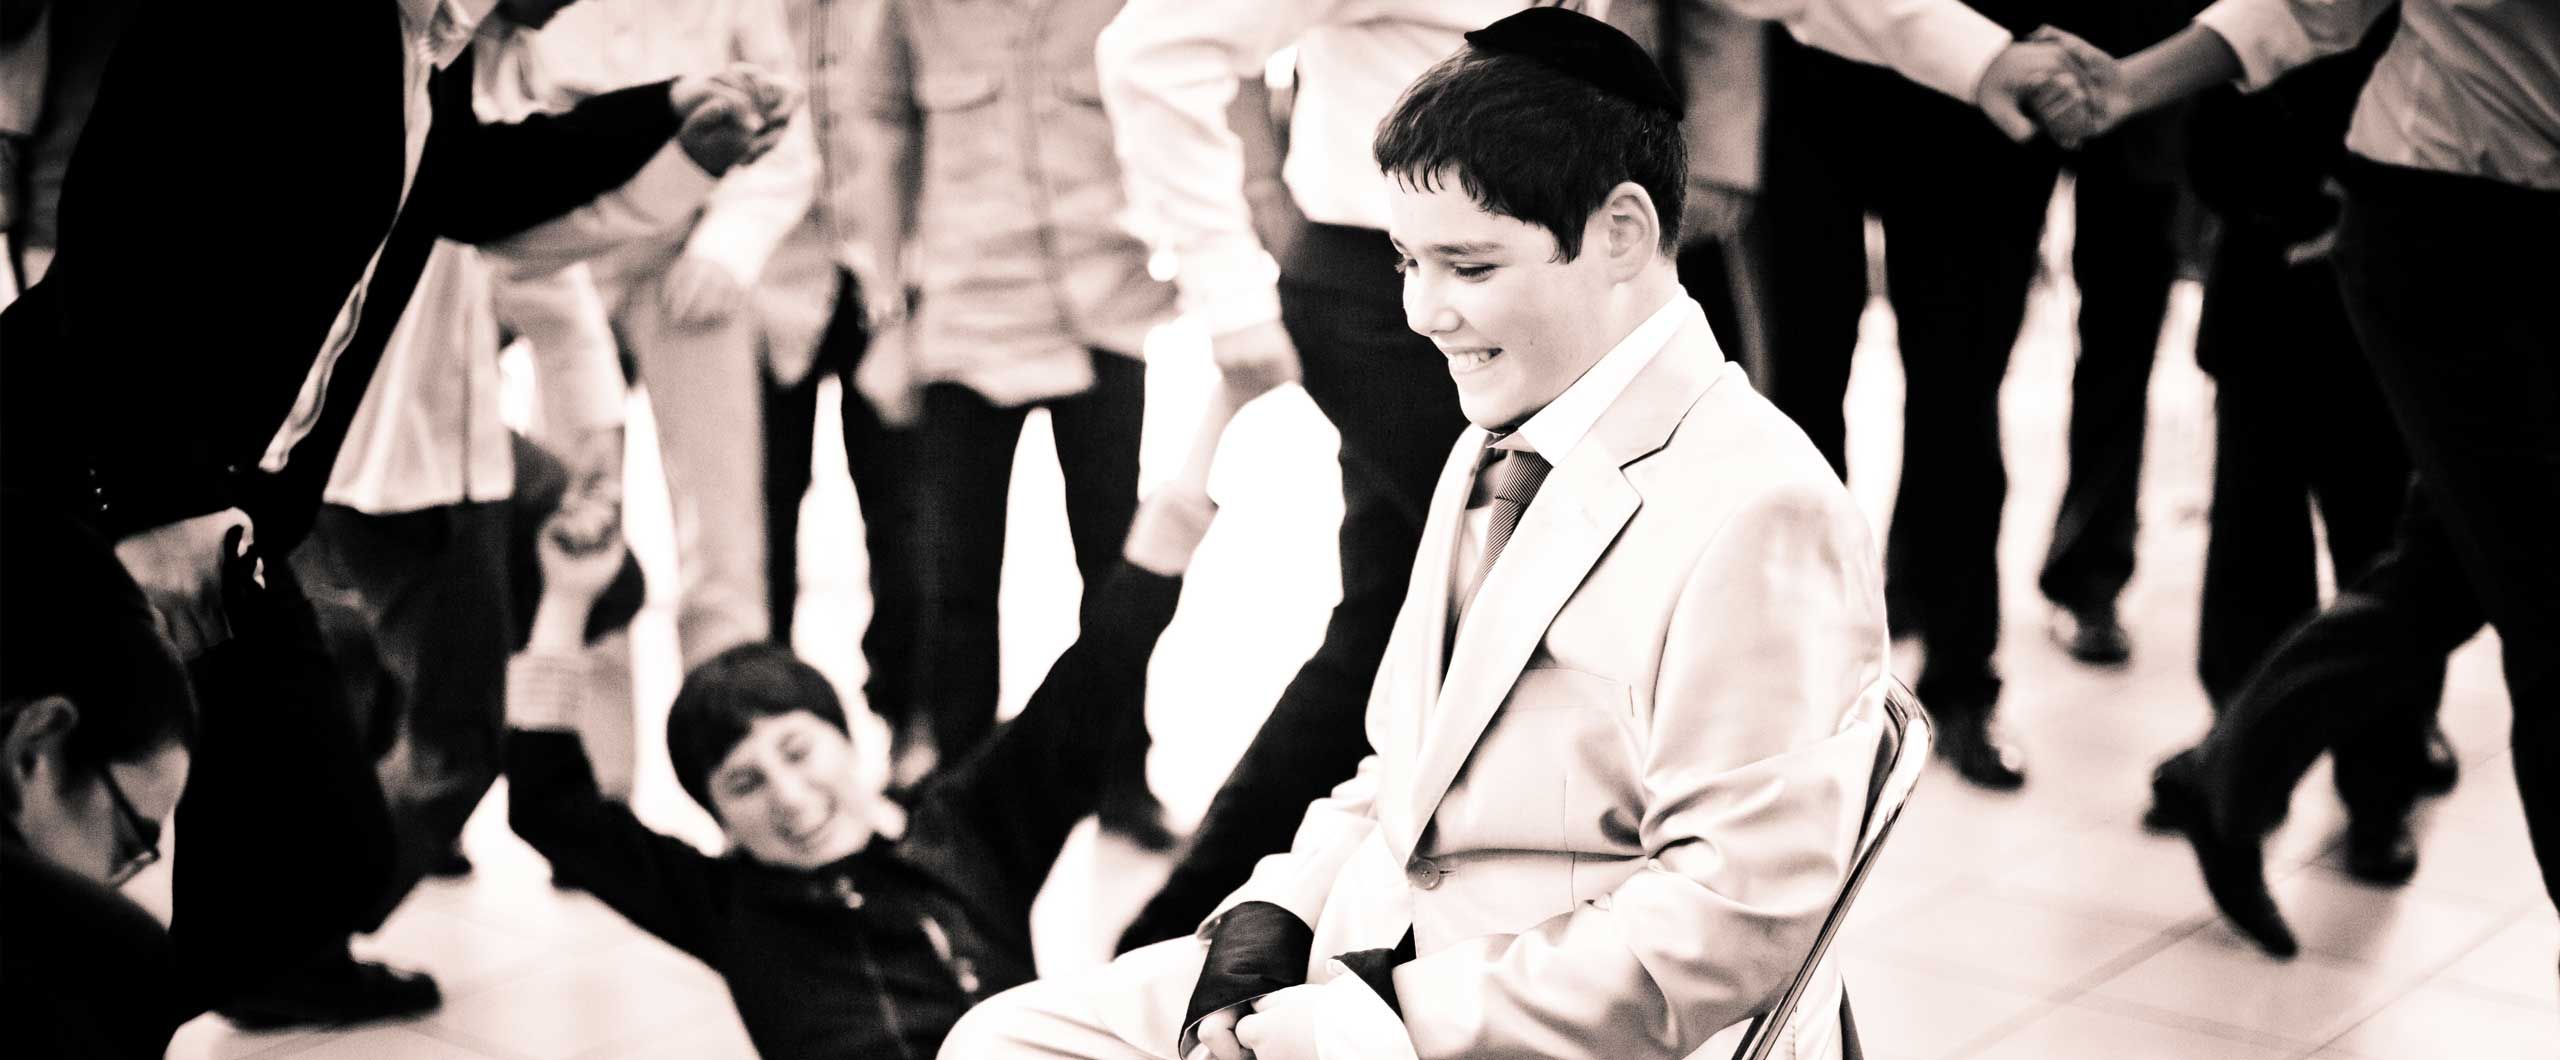 bar mitzvah photography contract template